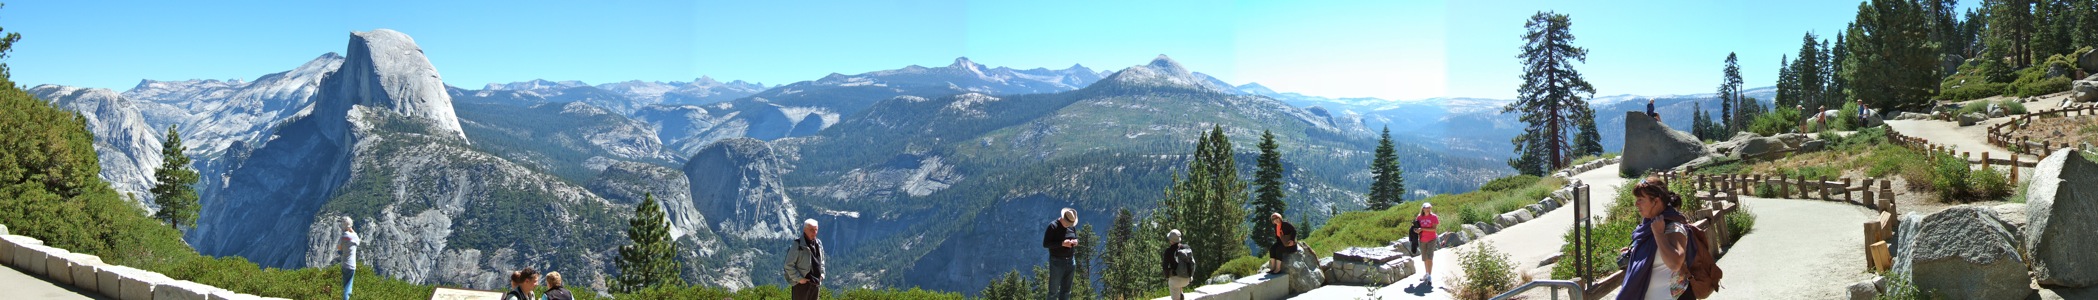 Glacier Point panorama east - 9/2010